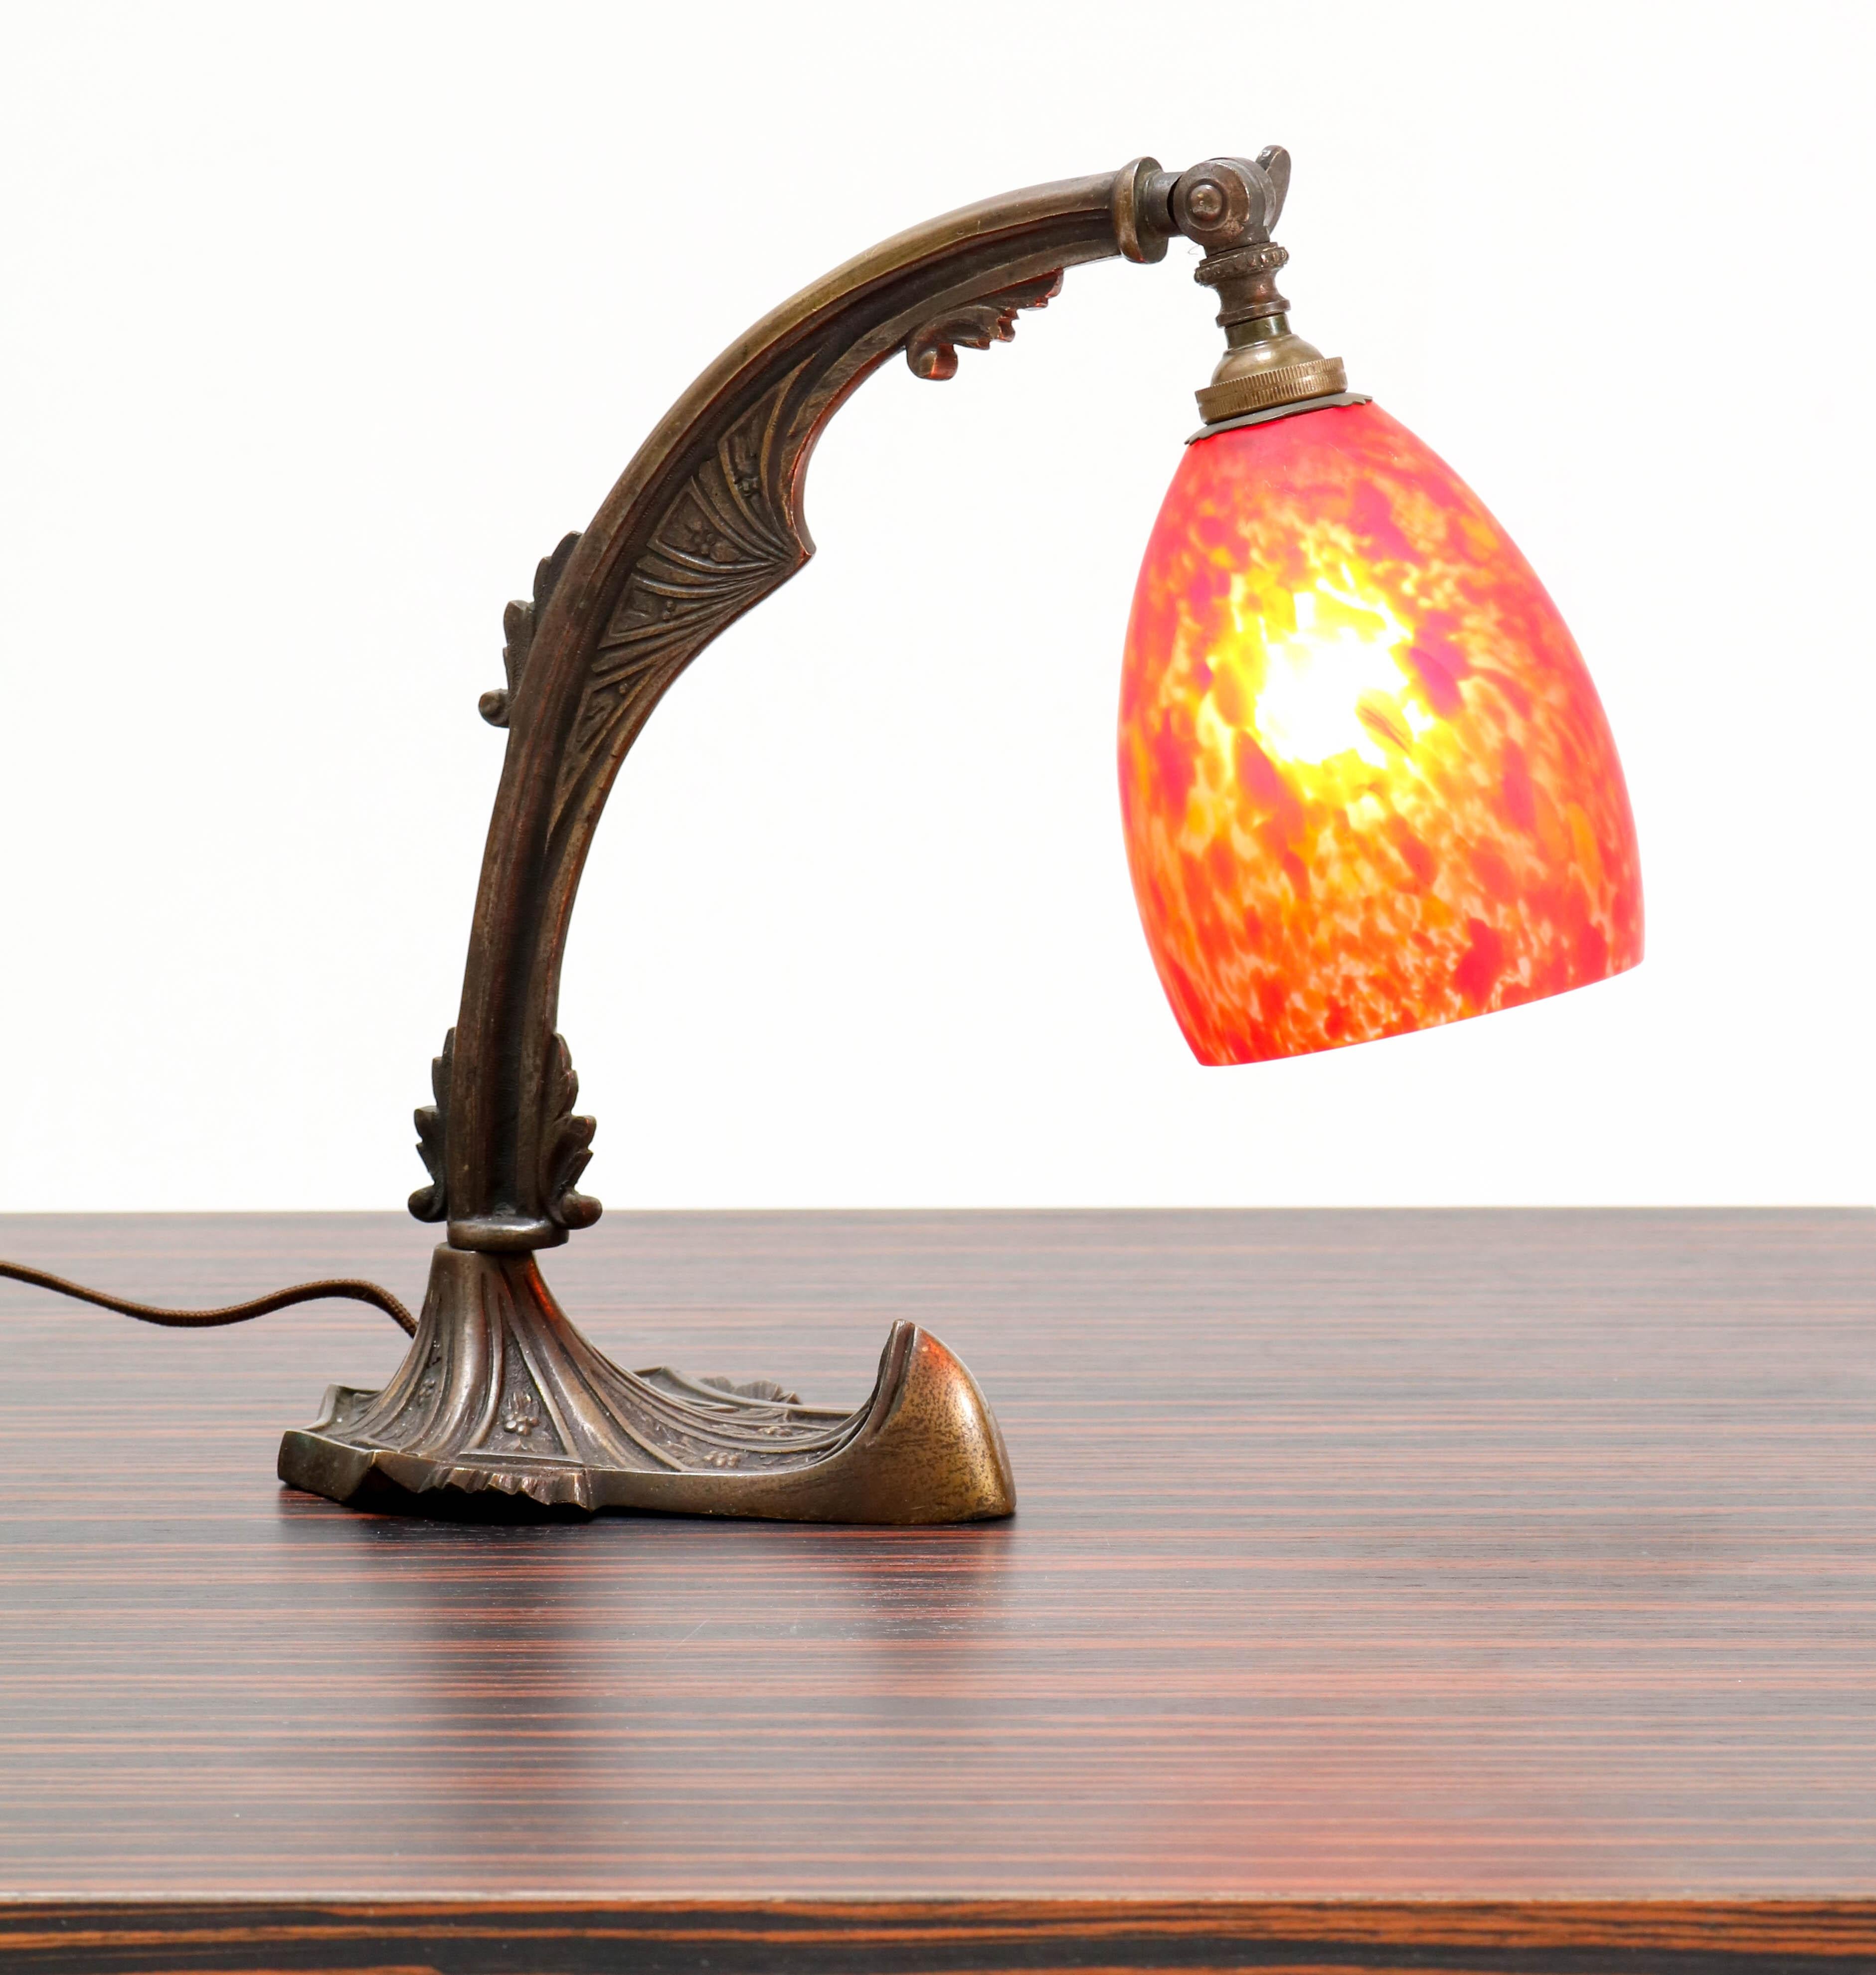 Stunning Art Deco Amsterdam School table lamp.
Striking Dutch design from the 1920s.
Solid patinated brass with glass shade.
Rewired with one socket for a B 27 light bulb.
In very good condition with a beautiful patina.